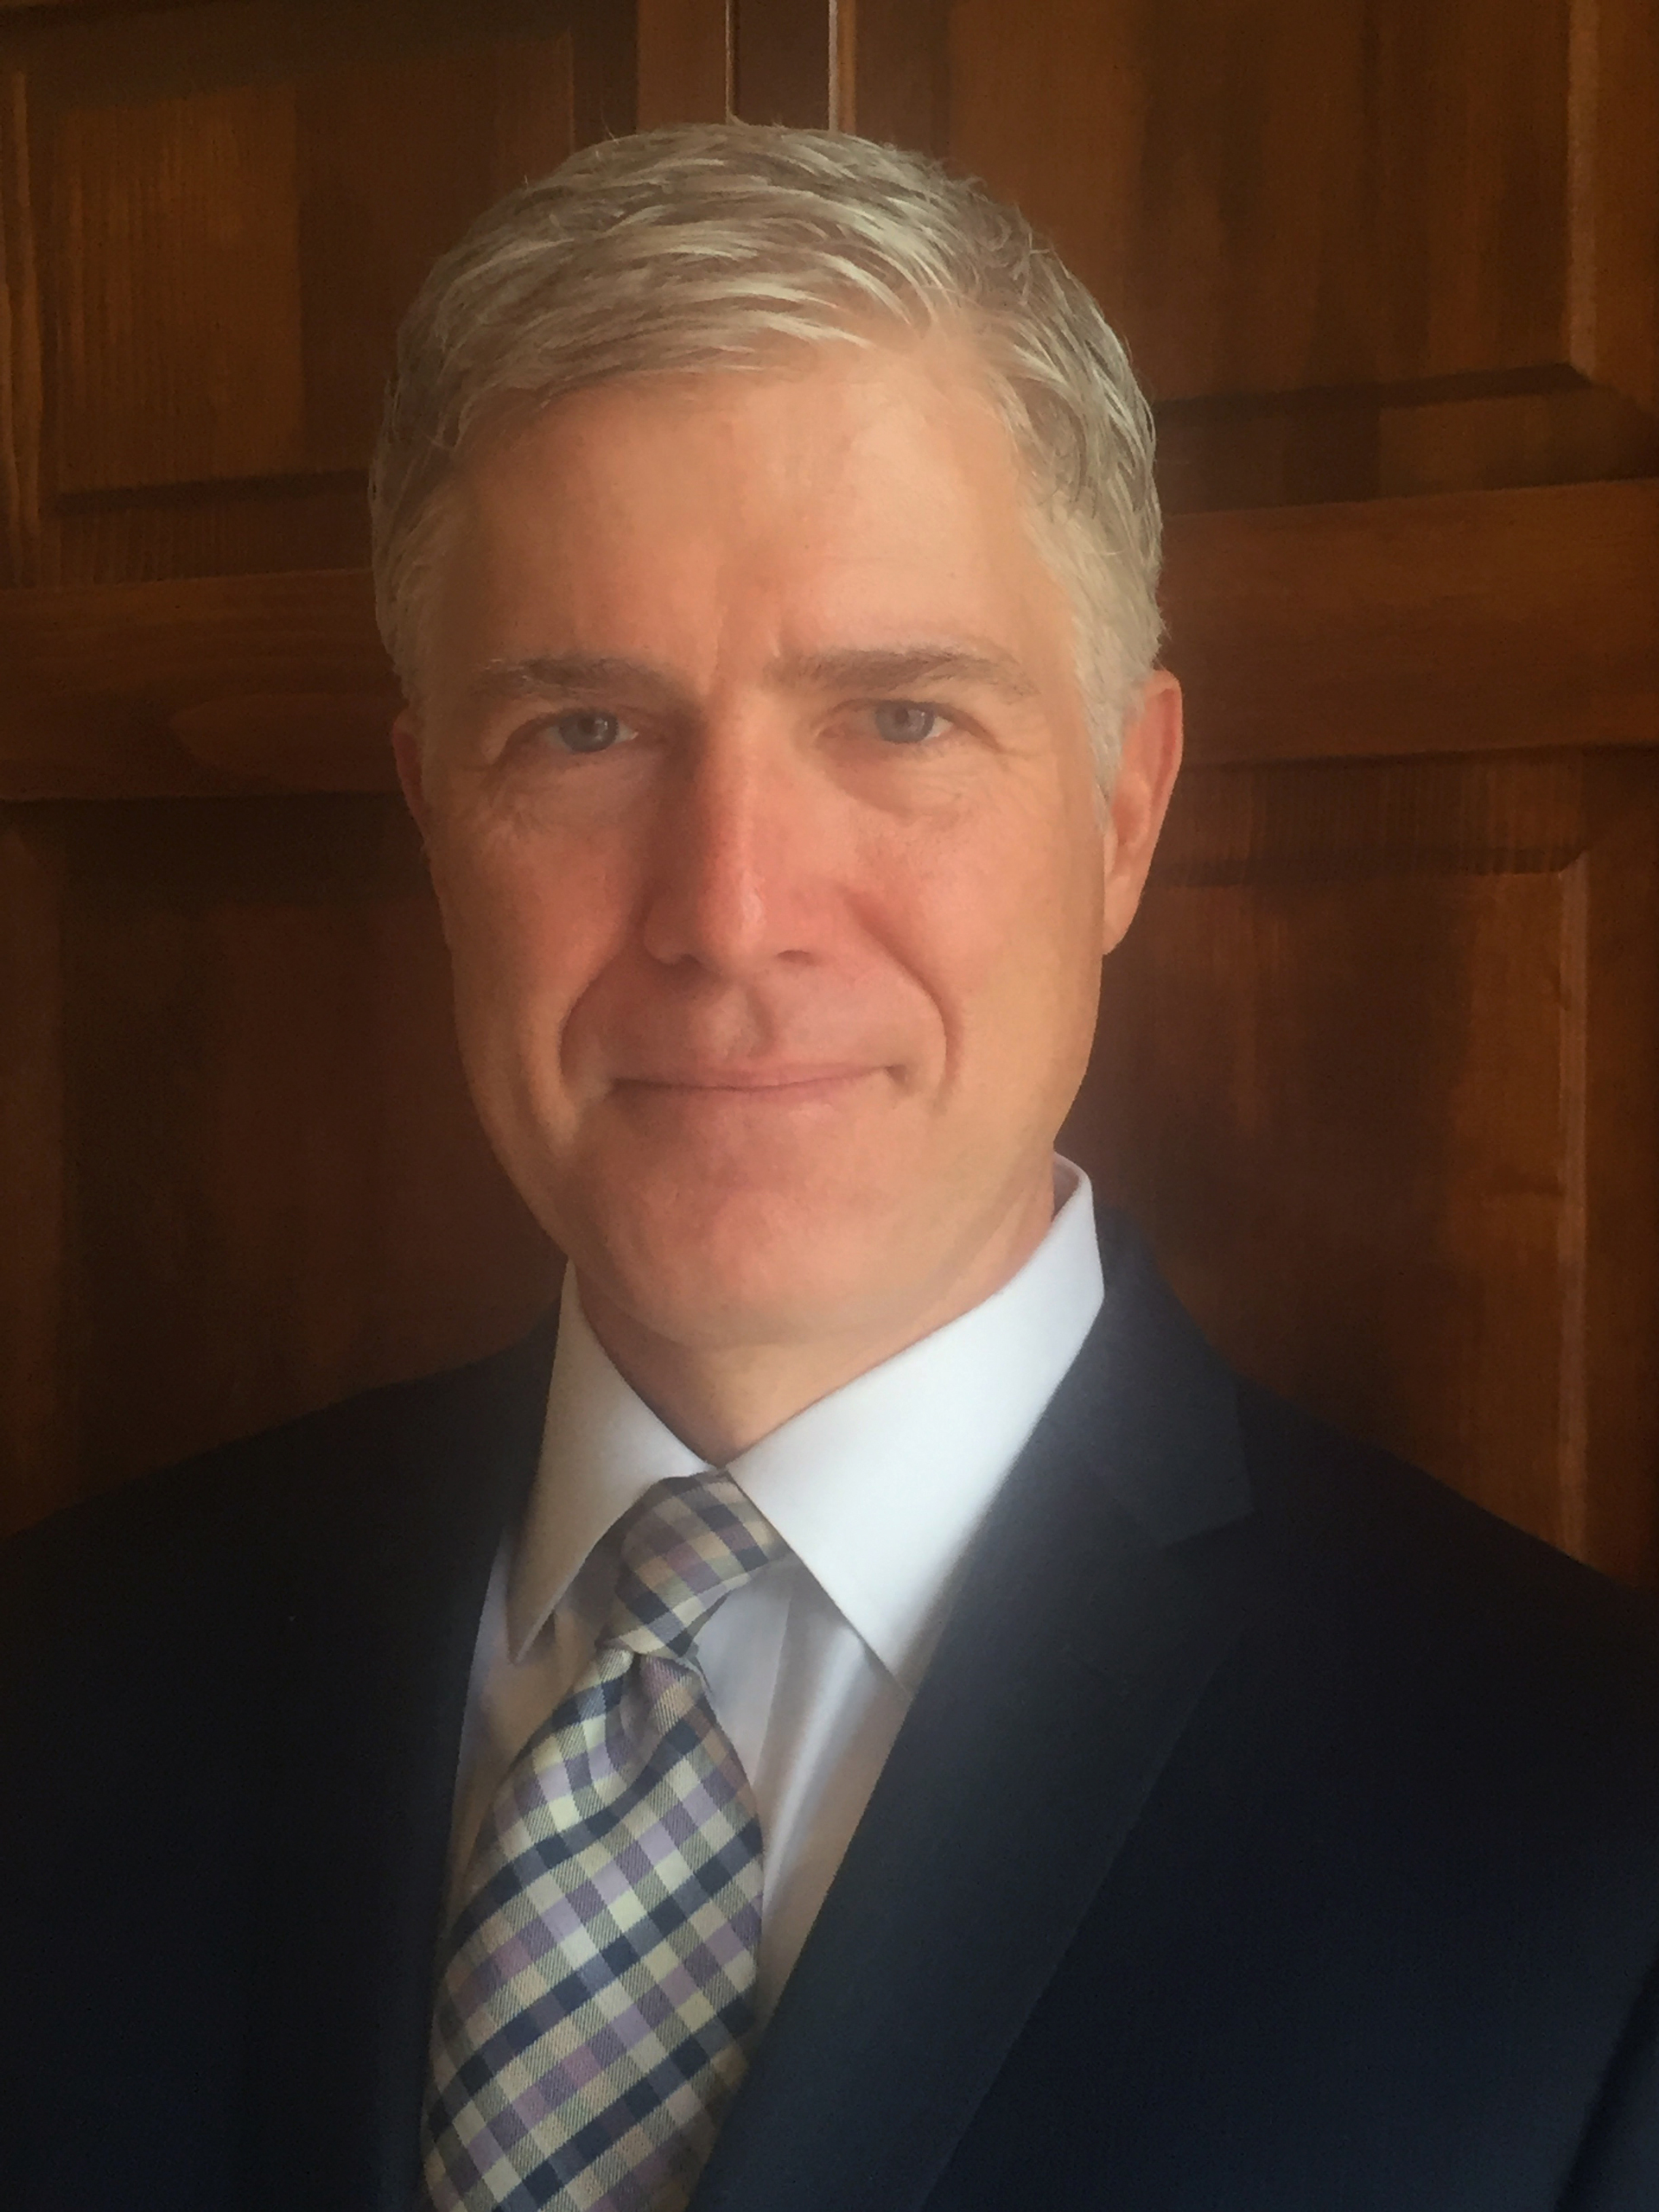 This photo provided by the 10th U.S. Circuit Court of Appeals shows Judge Neil Gorsuch. President Donald Trump has narrowed his choice to fill the Supreme Court vacancy to three judges and said he expects to make his decision in the coming days. The leading contenders, who all have met with Trump, are Gorsuch, William Pryor and Thomas Hardiman, the person said, speaking anonymously because he was not authorized to speak publicly about internal decisions. (10th U.S. Circuit Court of Appeals via AP)